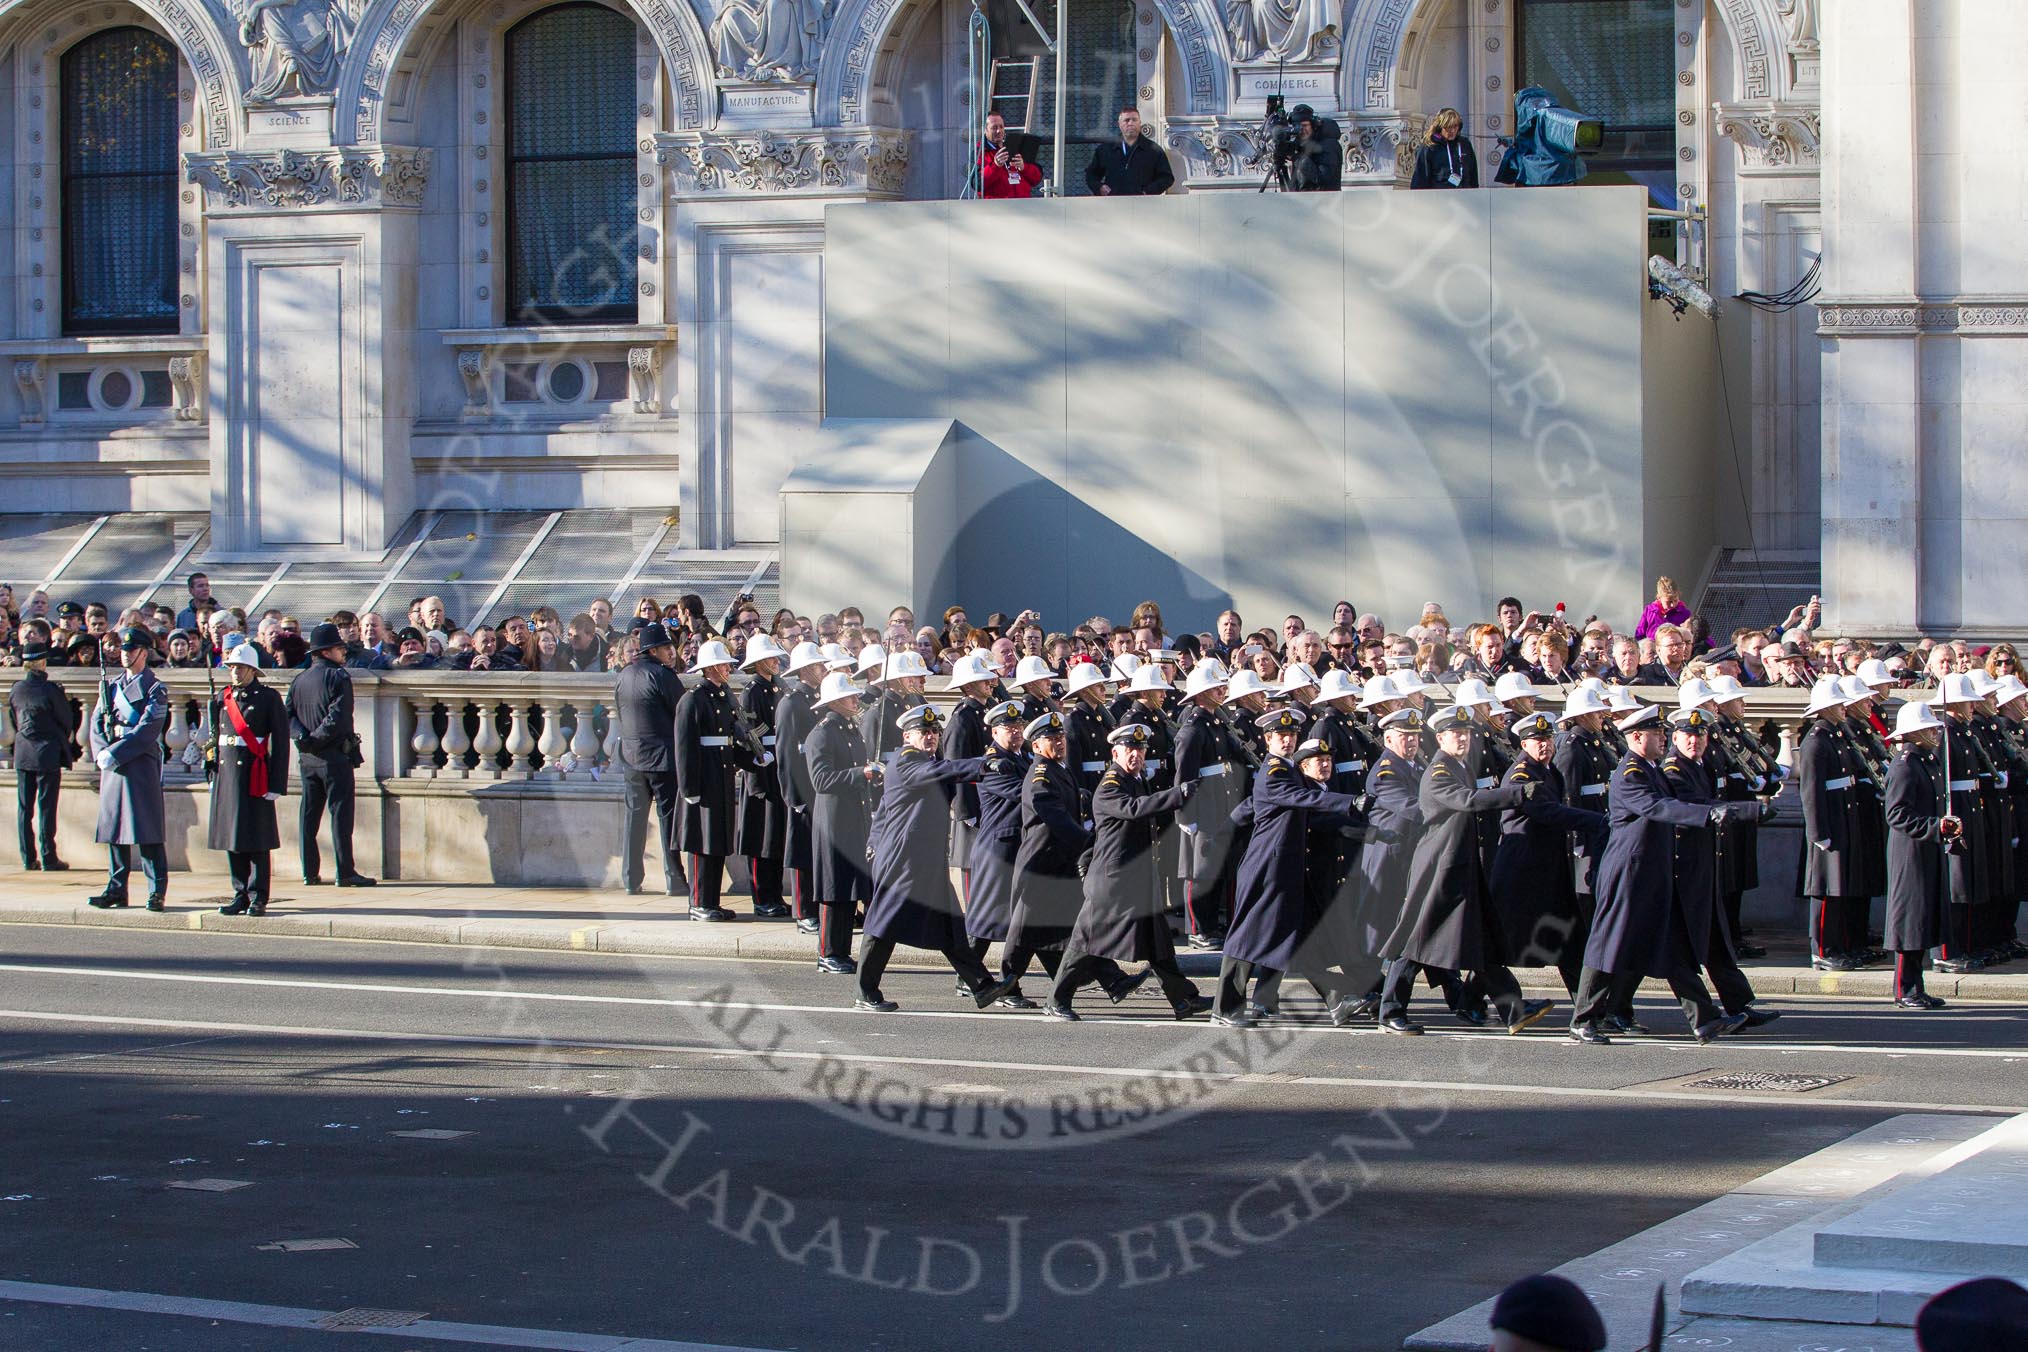 The Royal Marines and Royal Navy detachment marching past the Cenotaph.